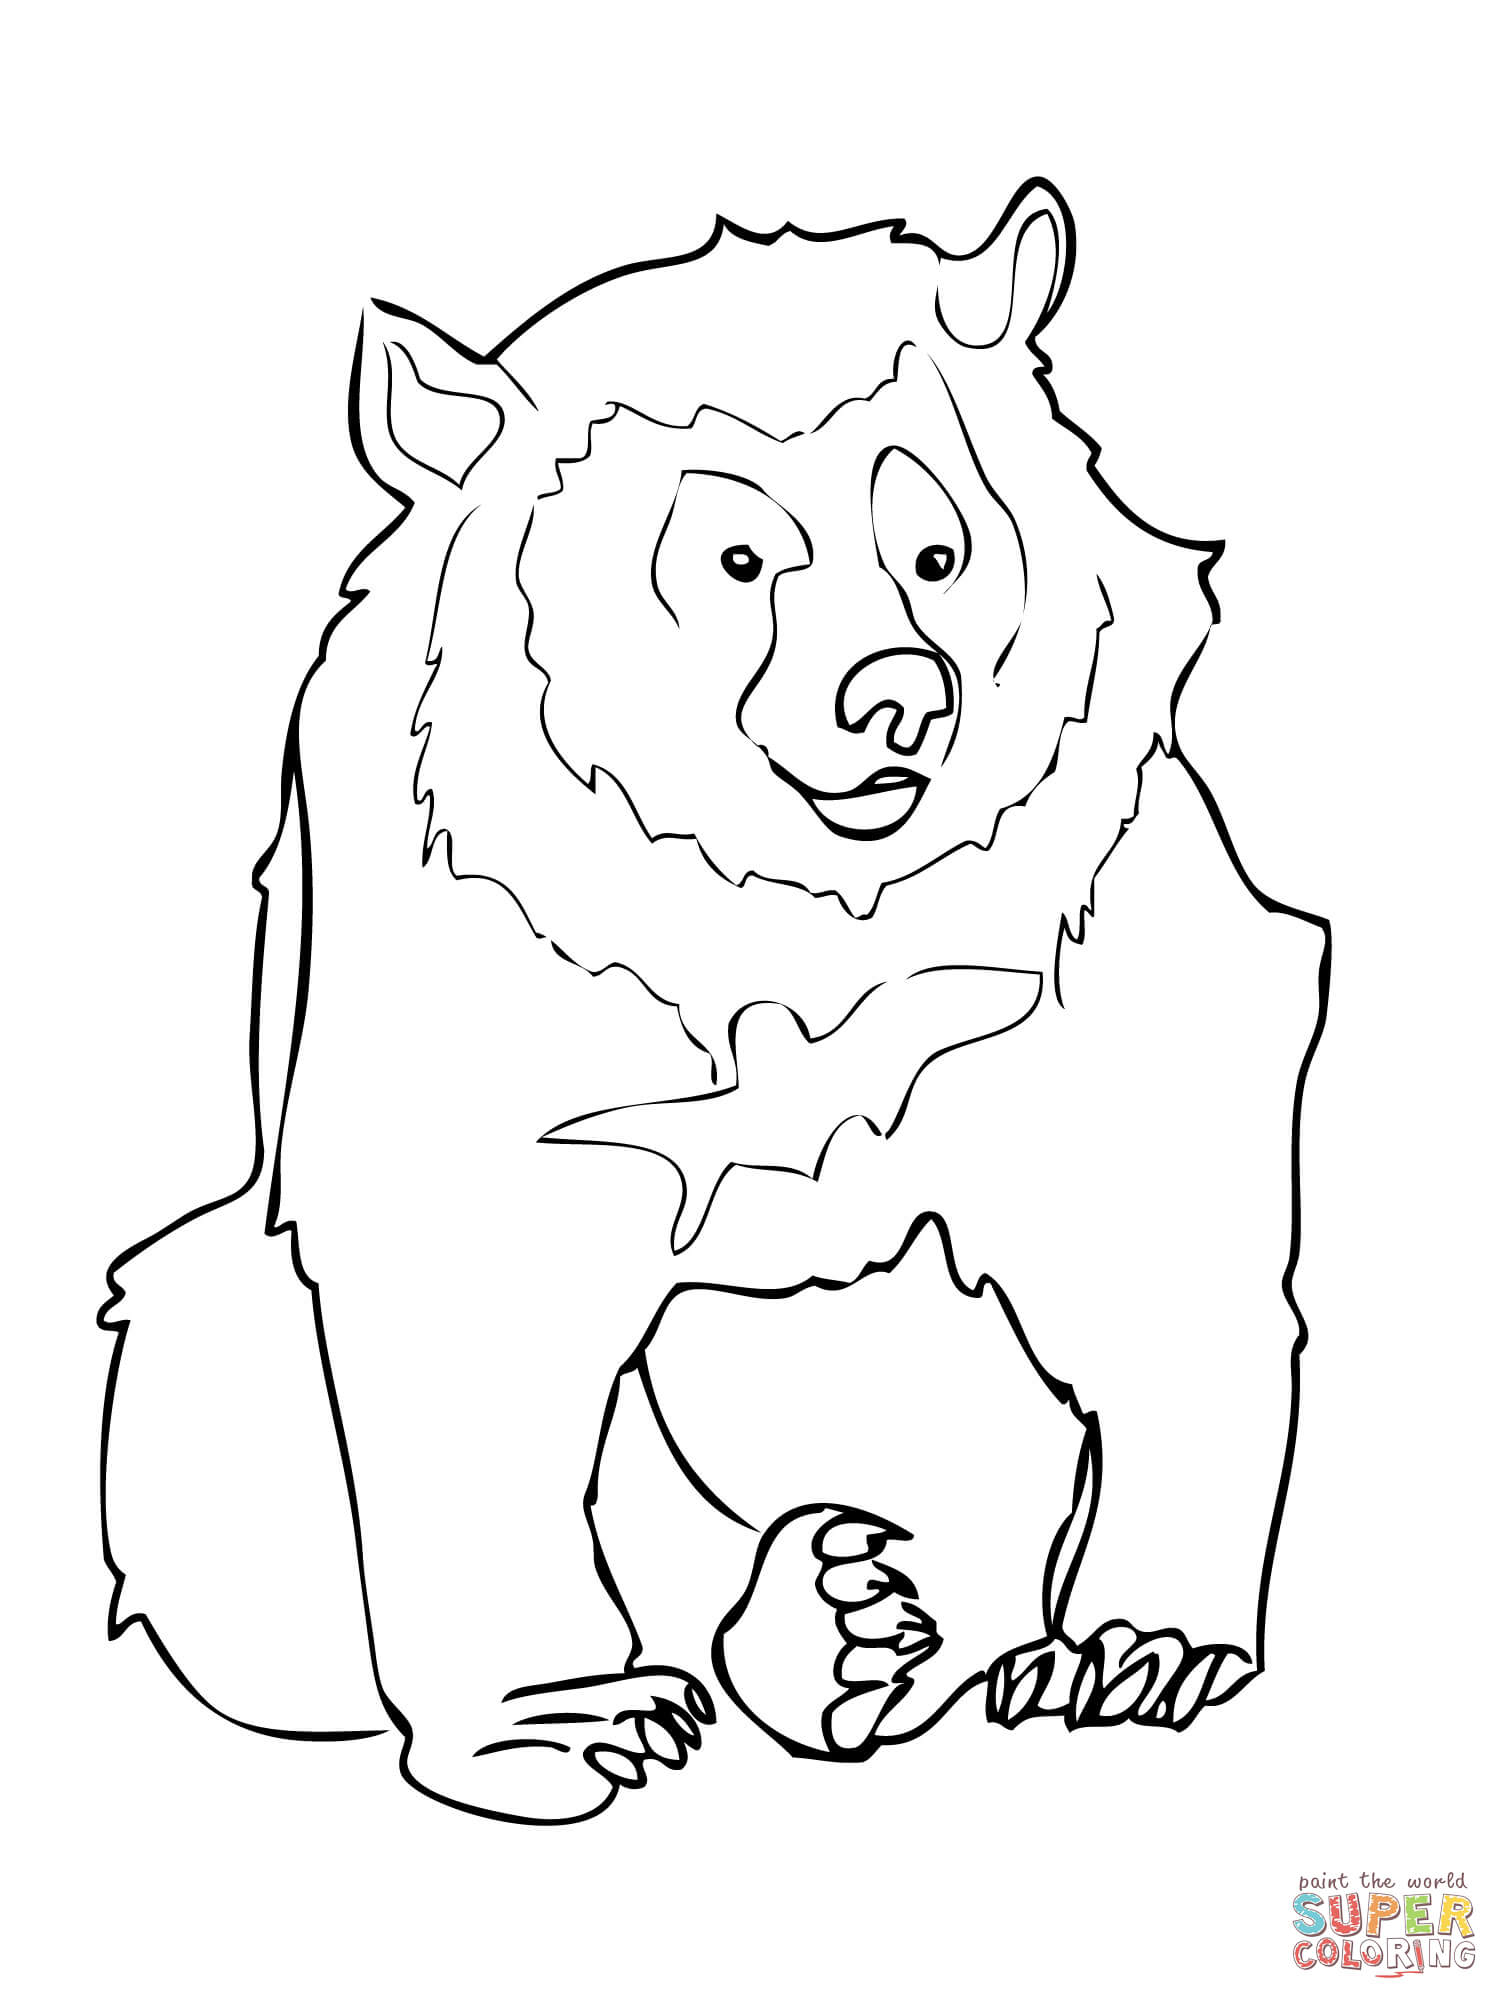 Coloring Pages Of Black Bears Asiatic Black Bear Coloring Page Free Printable Coloring Pages